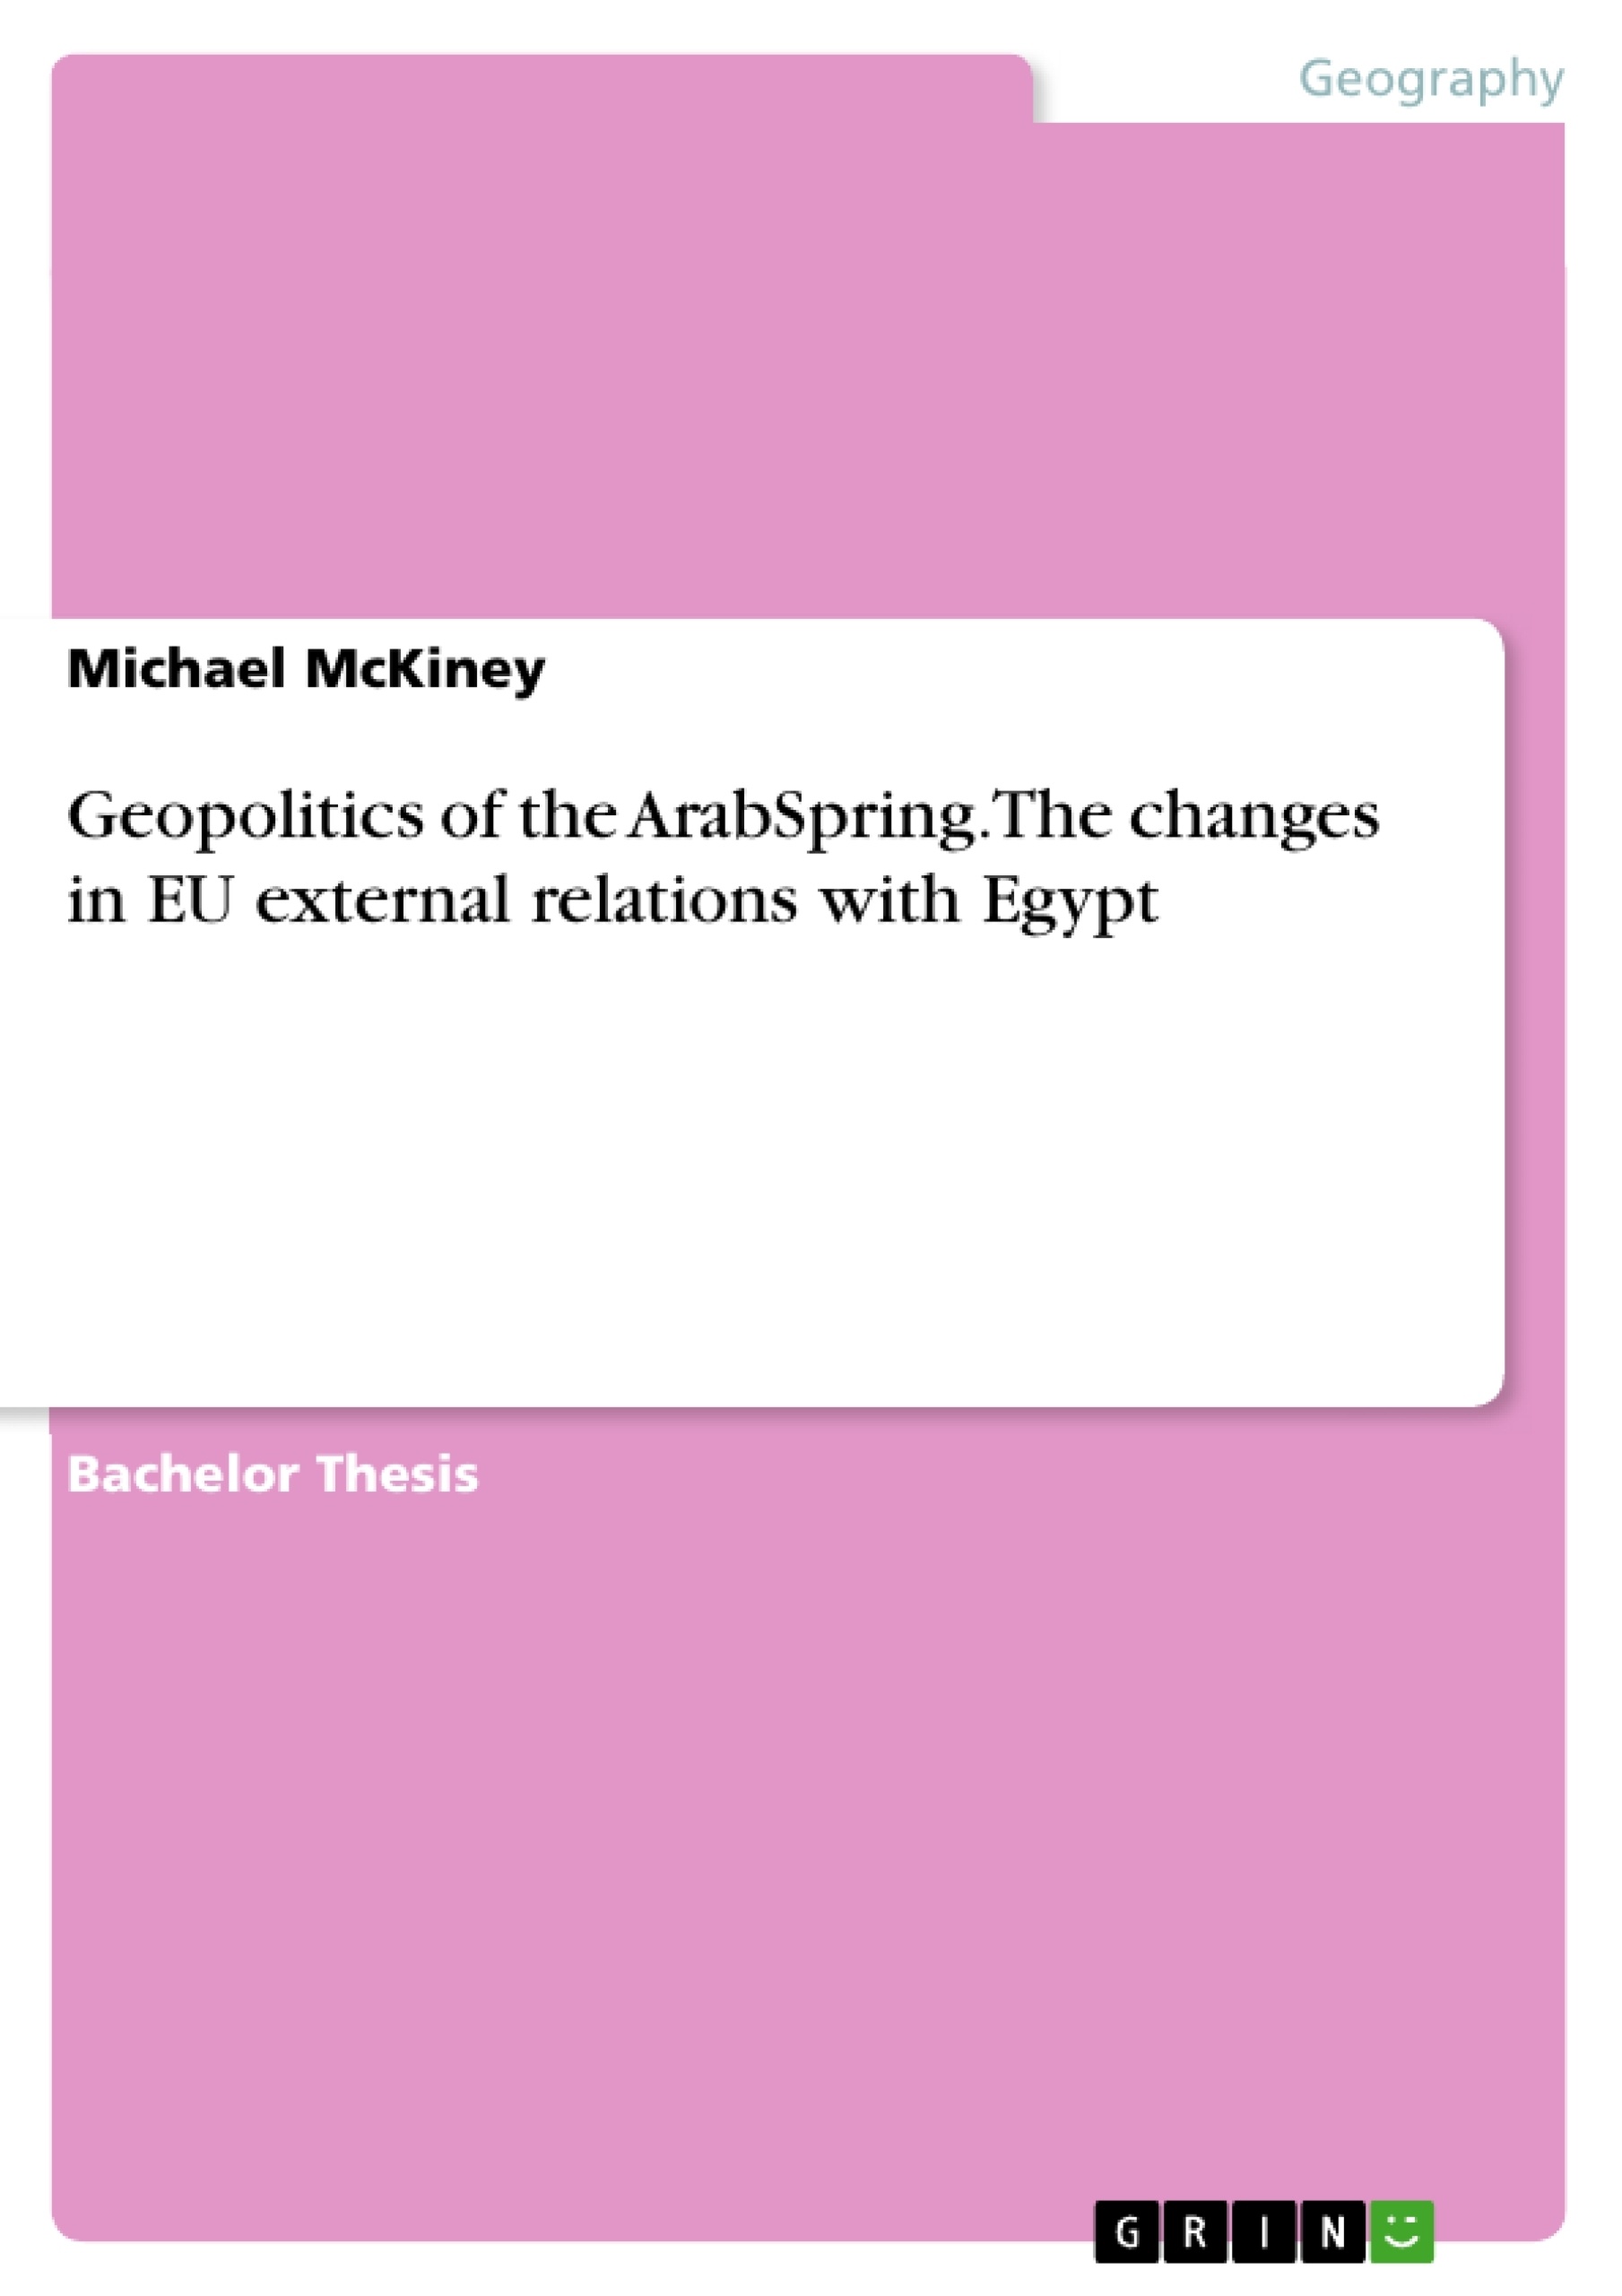 Titre: Geopolitics of the ArabSpring. The changes in EU external relations with Egypt